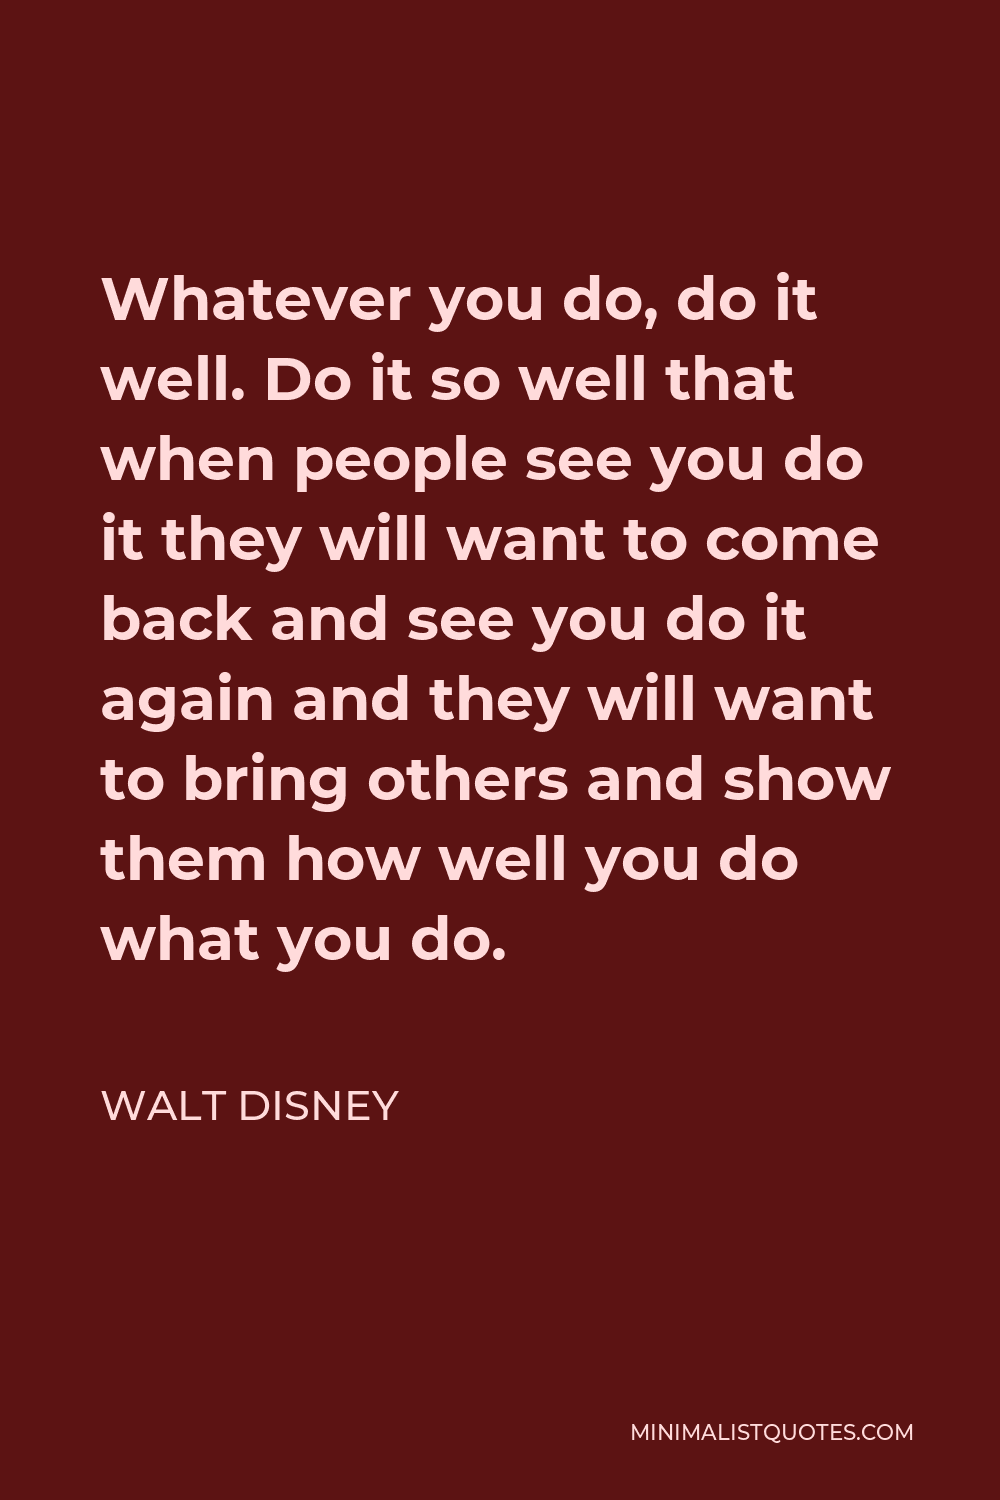 Walt Disney Quote - Whatever you do, do it well. Do it so well that when people see you do it they will want to come back and see you do it again and they will want to bring others and show them how well you do what you do.